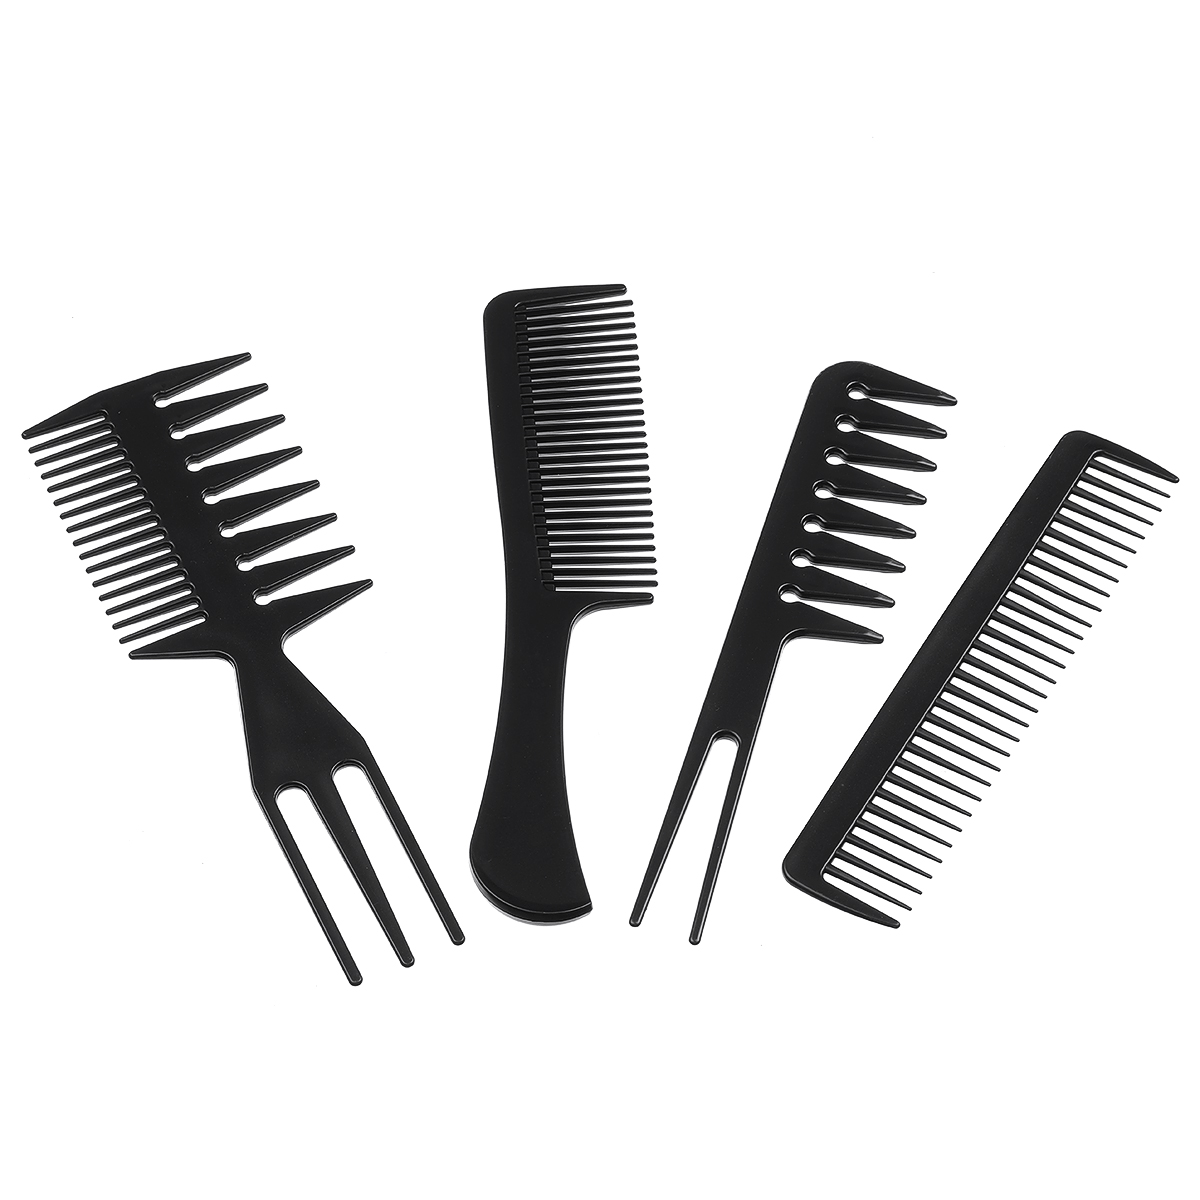 11PCS Salon Hair Styling Hairdressing Tool Barbers Brush Combs w/ Apron Cloth